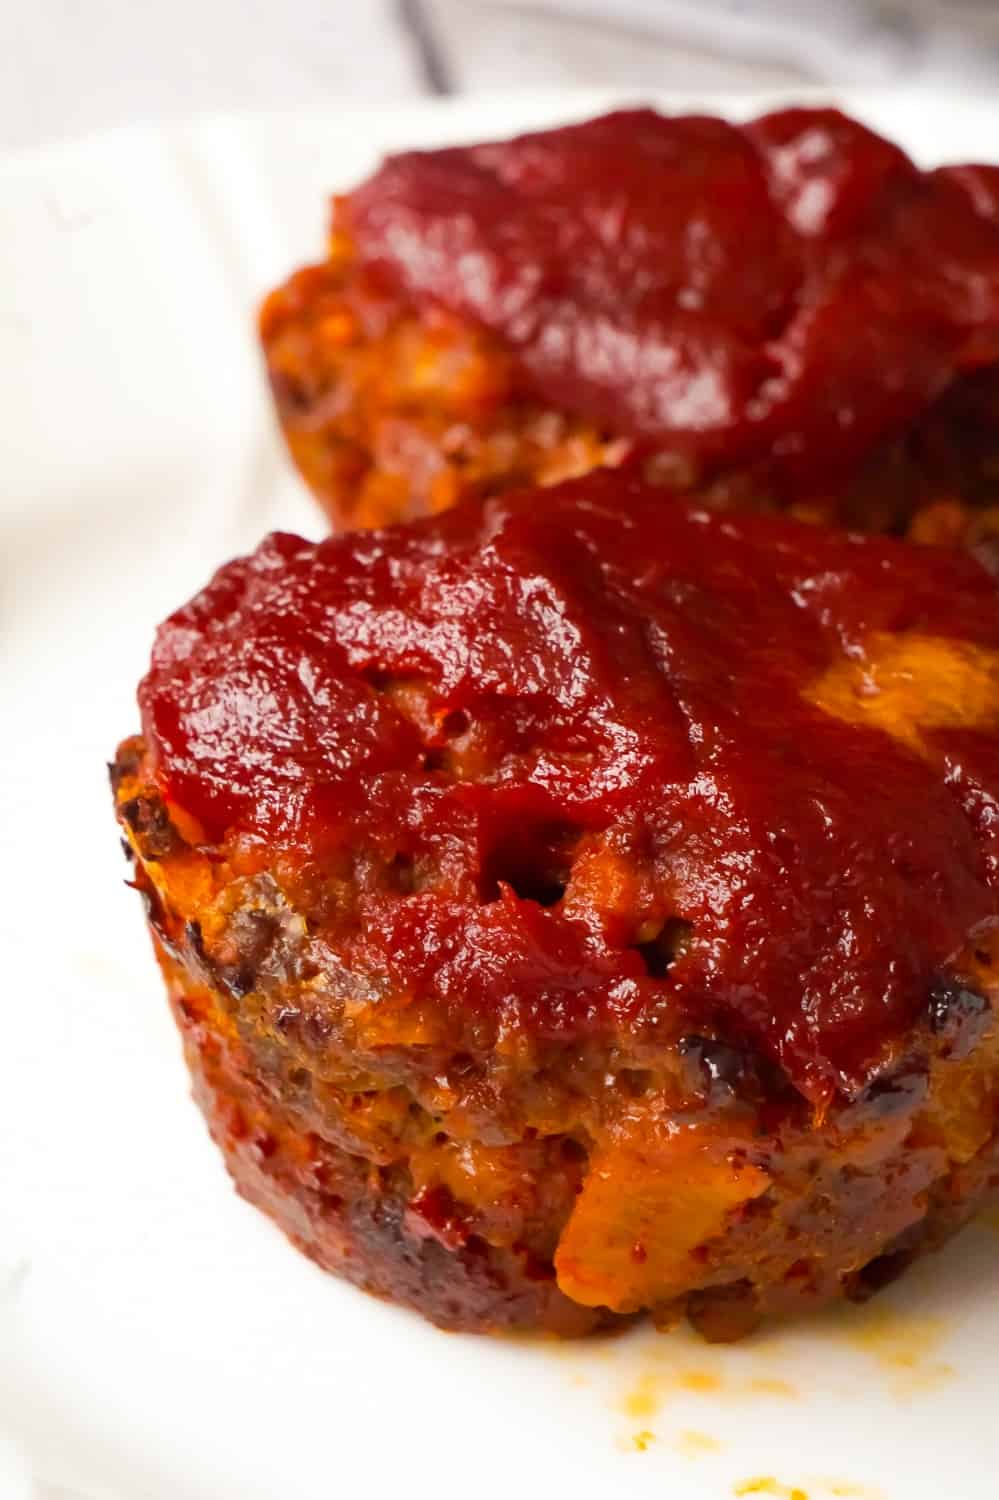 Meatloaf Muffins are a fun alternative to classic meatloaf. These tasty mini meatloaves are made with Lipton Onion Soup Mix and crushed Ritz Crackers.